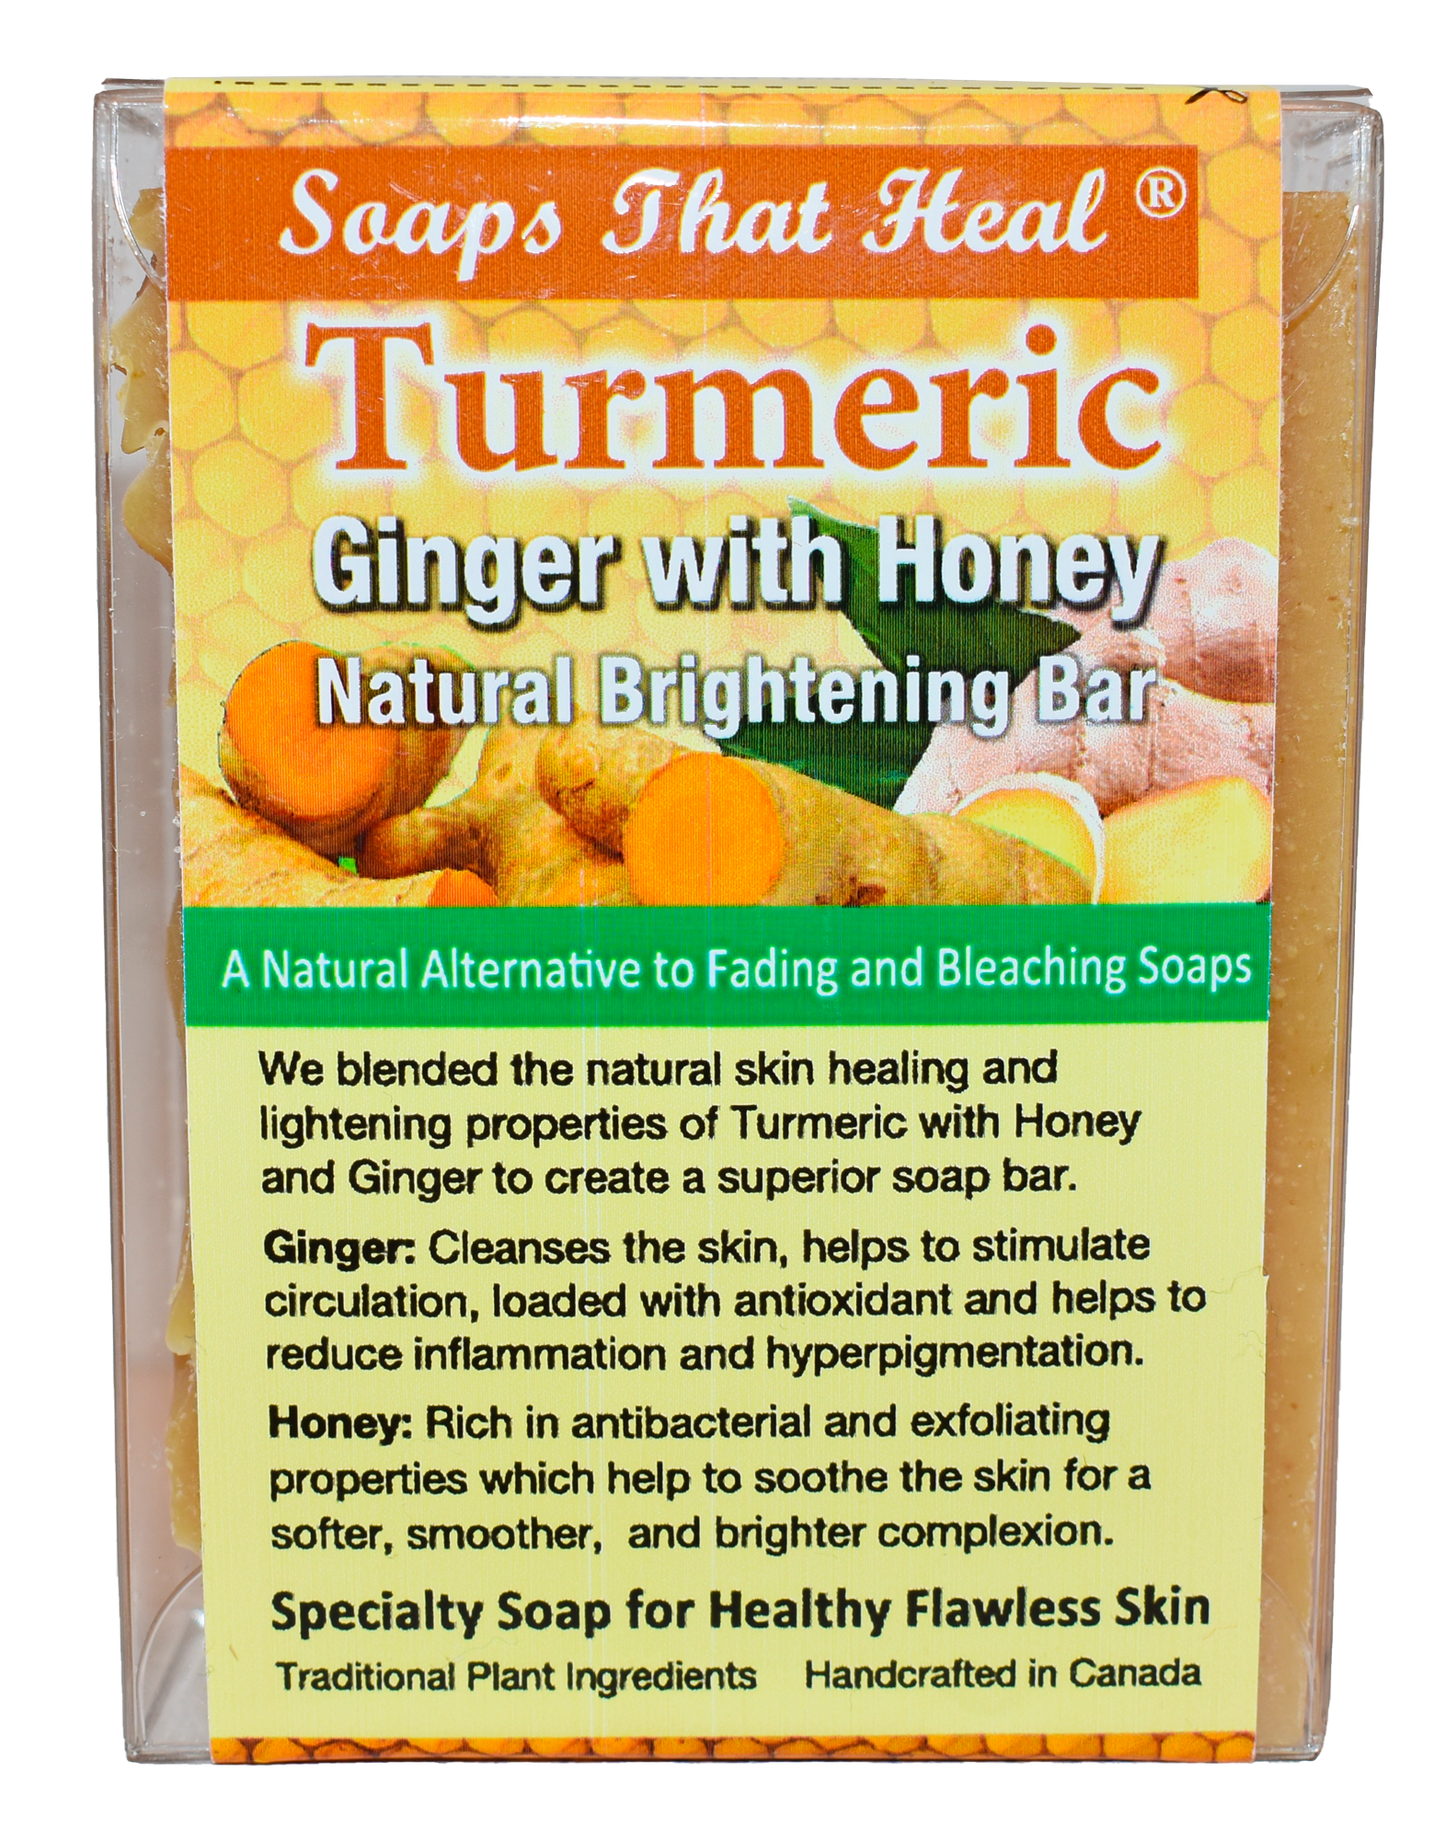 Turmeric Ginger with Honey Brightening Bar an effective solution for facial hyperpigmentation. Infused with turmeric, ginger, and honey, it helps reduce dark spots, promoting a brighter, even-toned complexion,Ginger:  Cleanses the skin, helps to stimulate circulation, loaded with antioxidant and helps to reduce inflammation and hyperpigmentation.  Honey:  Rich in antibacterial and exfoliating properties which help to soothe the skin for a softer, smoother,  and brighter complexion. 